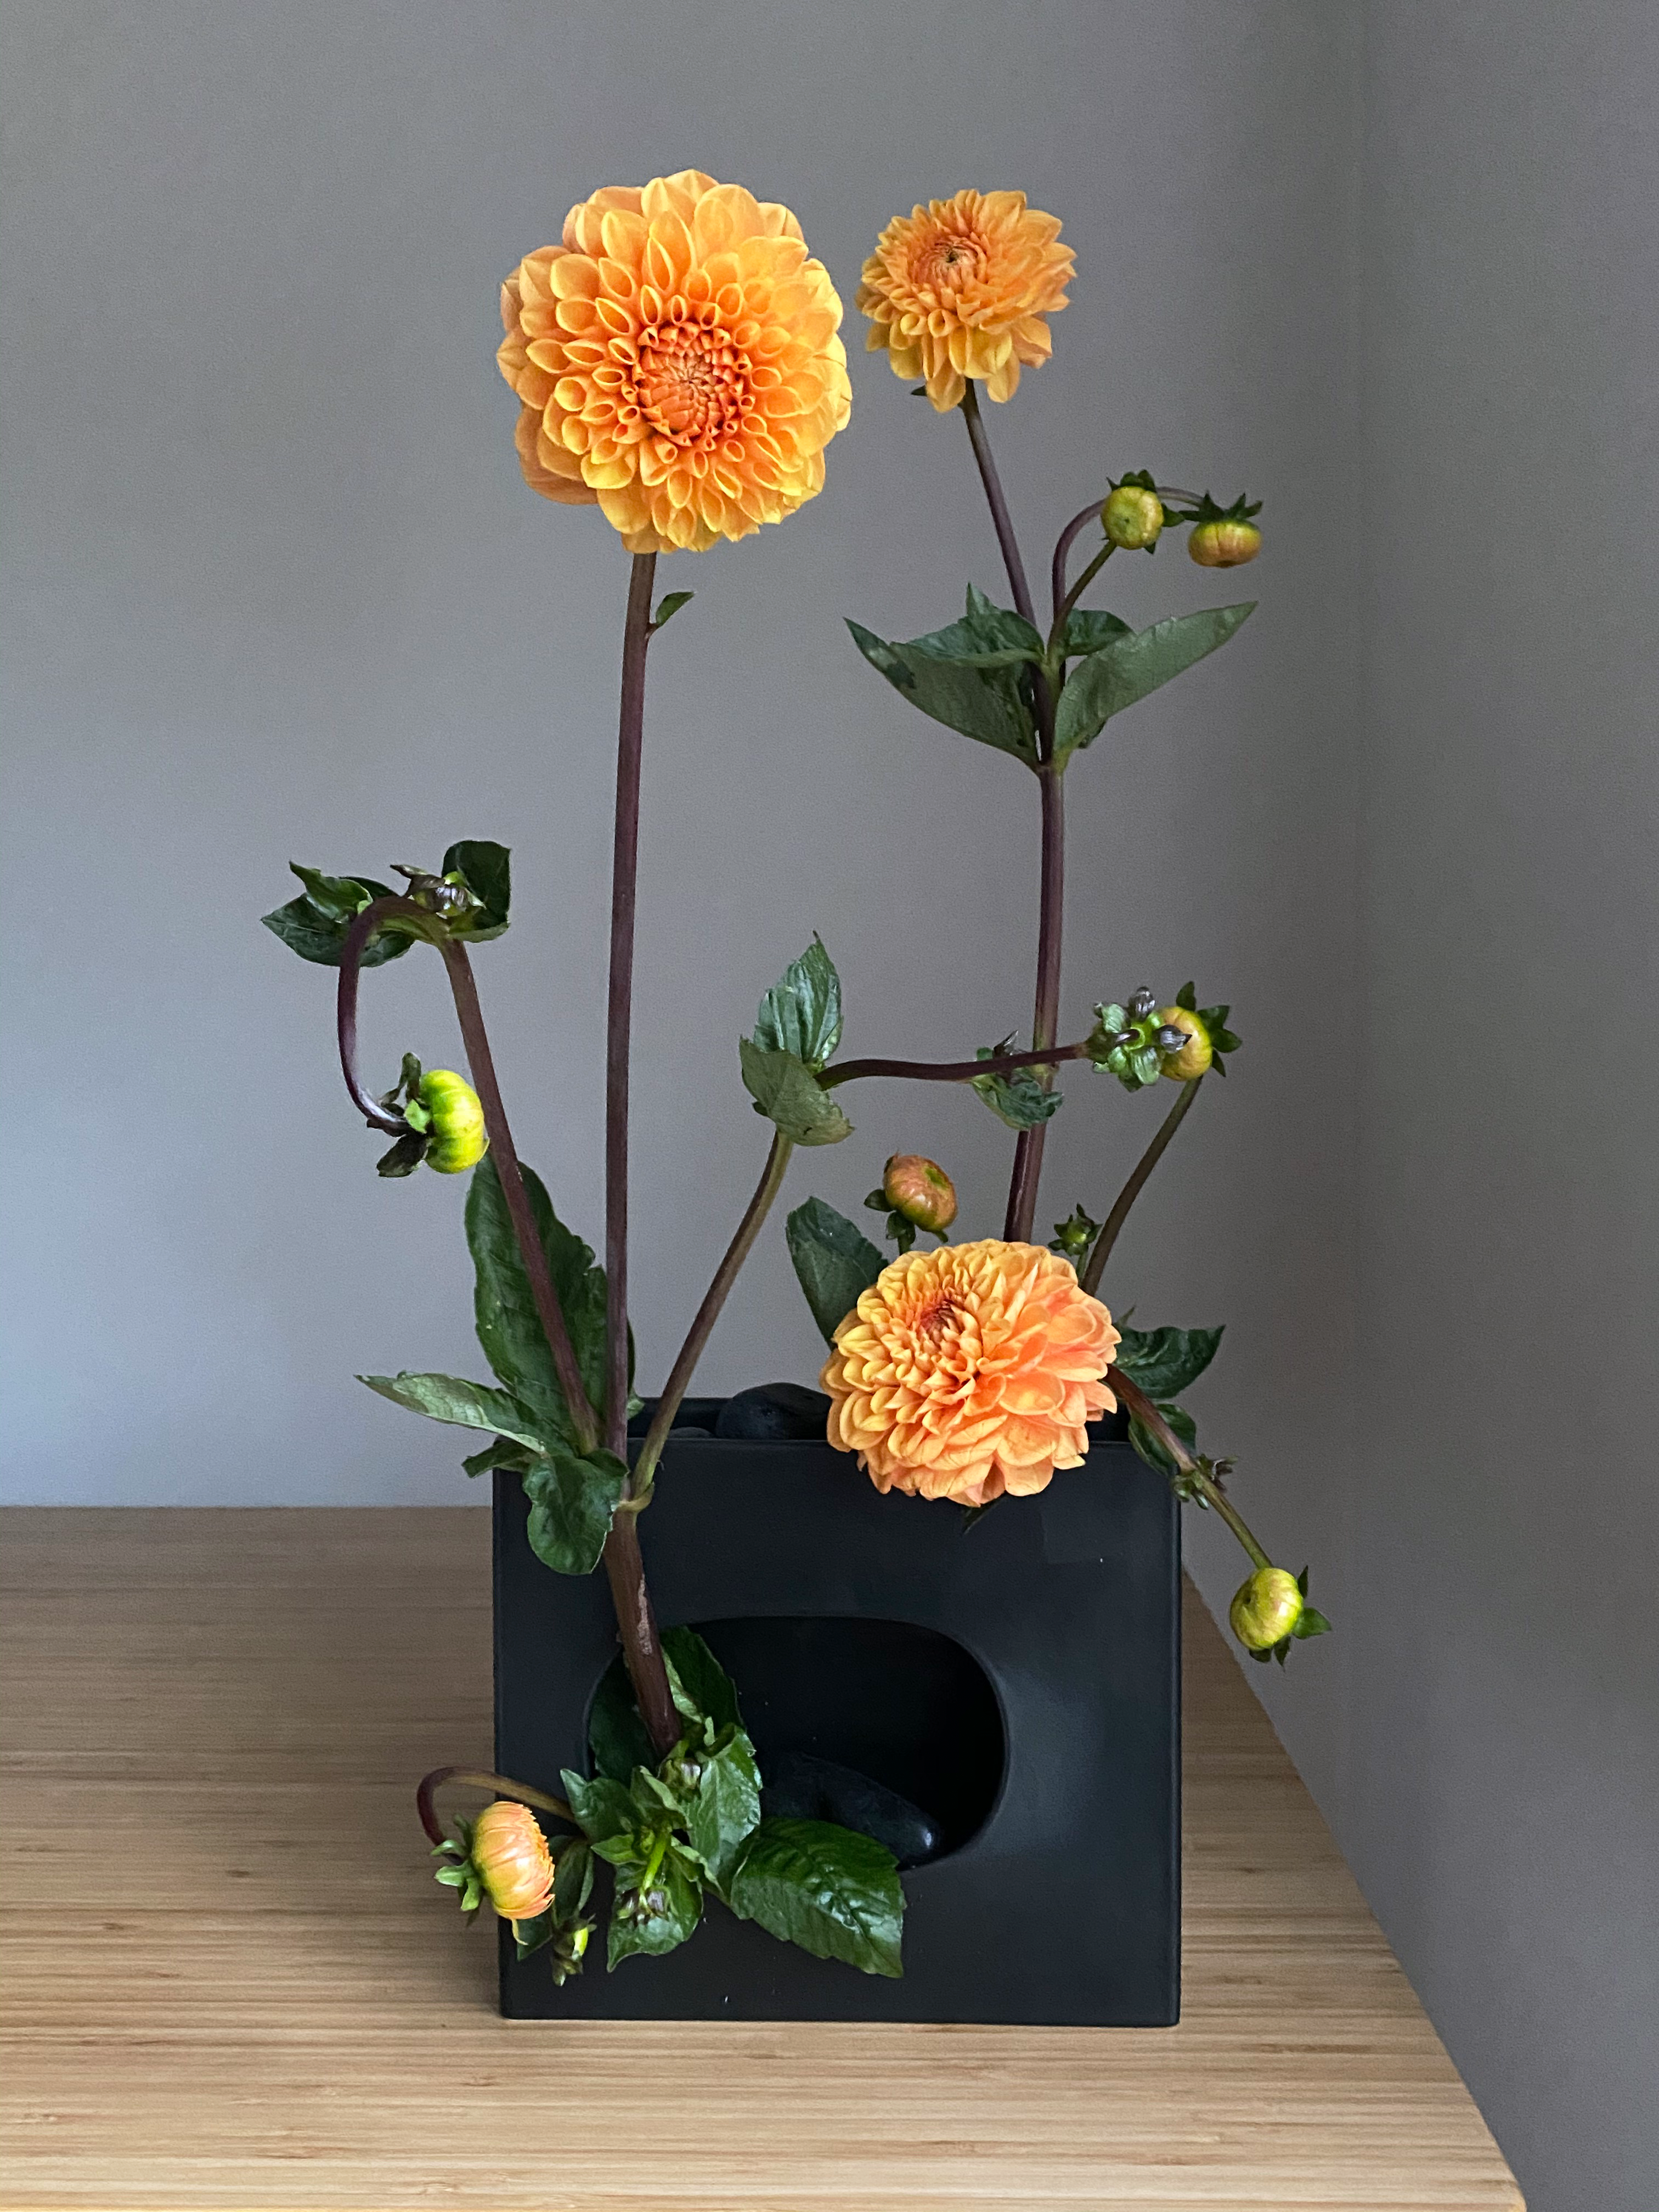 A floral arrangement made up of three orange dahlias, in a rectangular vase. The vase has a circular hole in the middle, where one dahlia is coming out. The top of the vase dips down, holding two other dahlias.